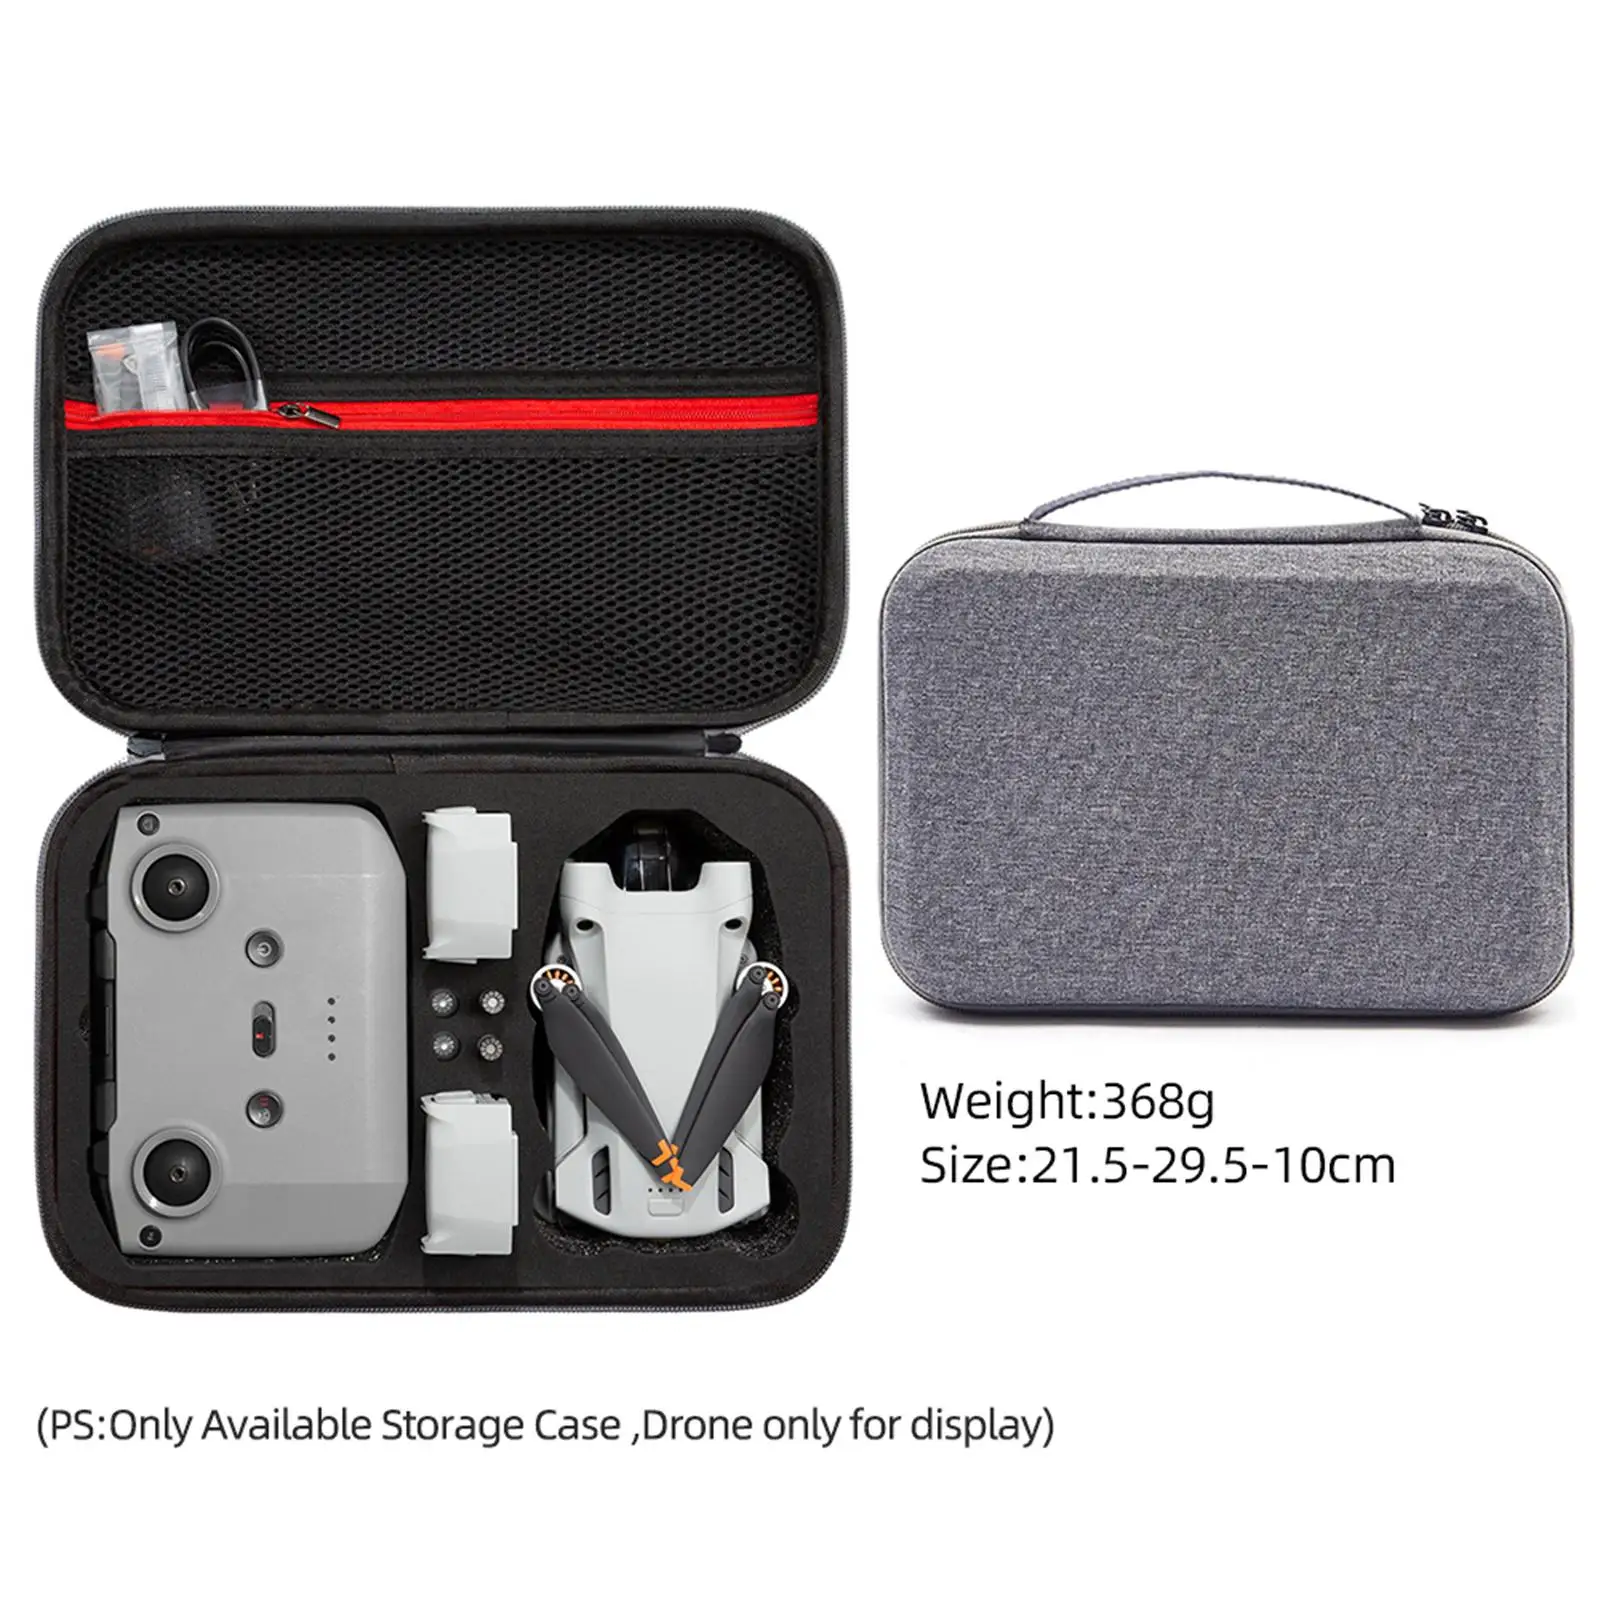 Drone Carrying Case Protective Storage Case Remote Control Bag Wear Resistant Storage Bag for DJI Mini 3 Pro Drone Accessories